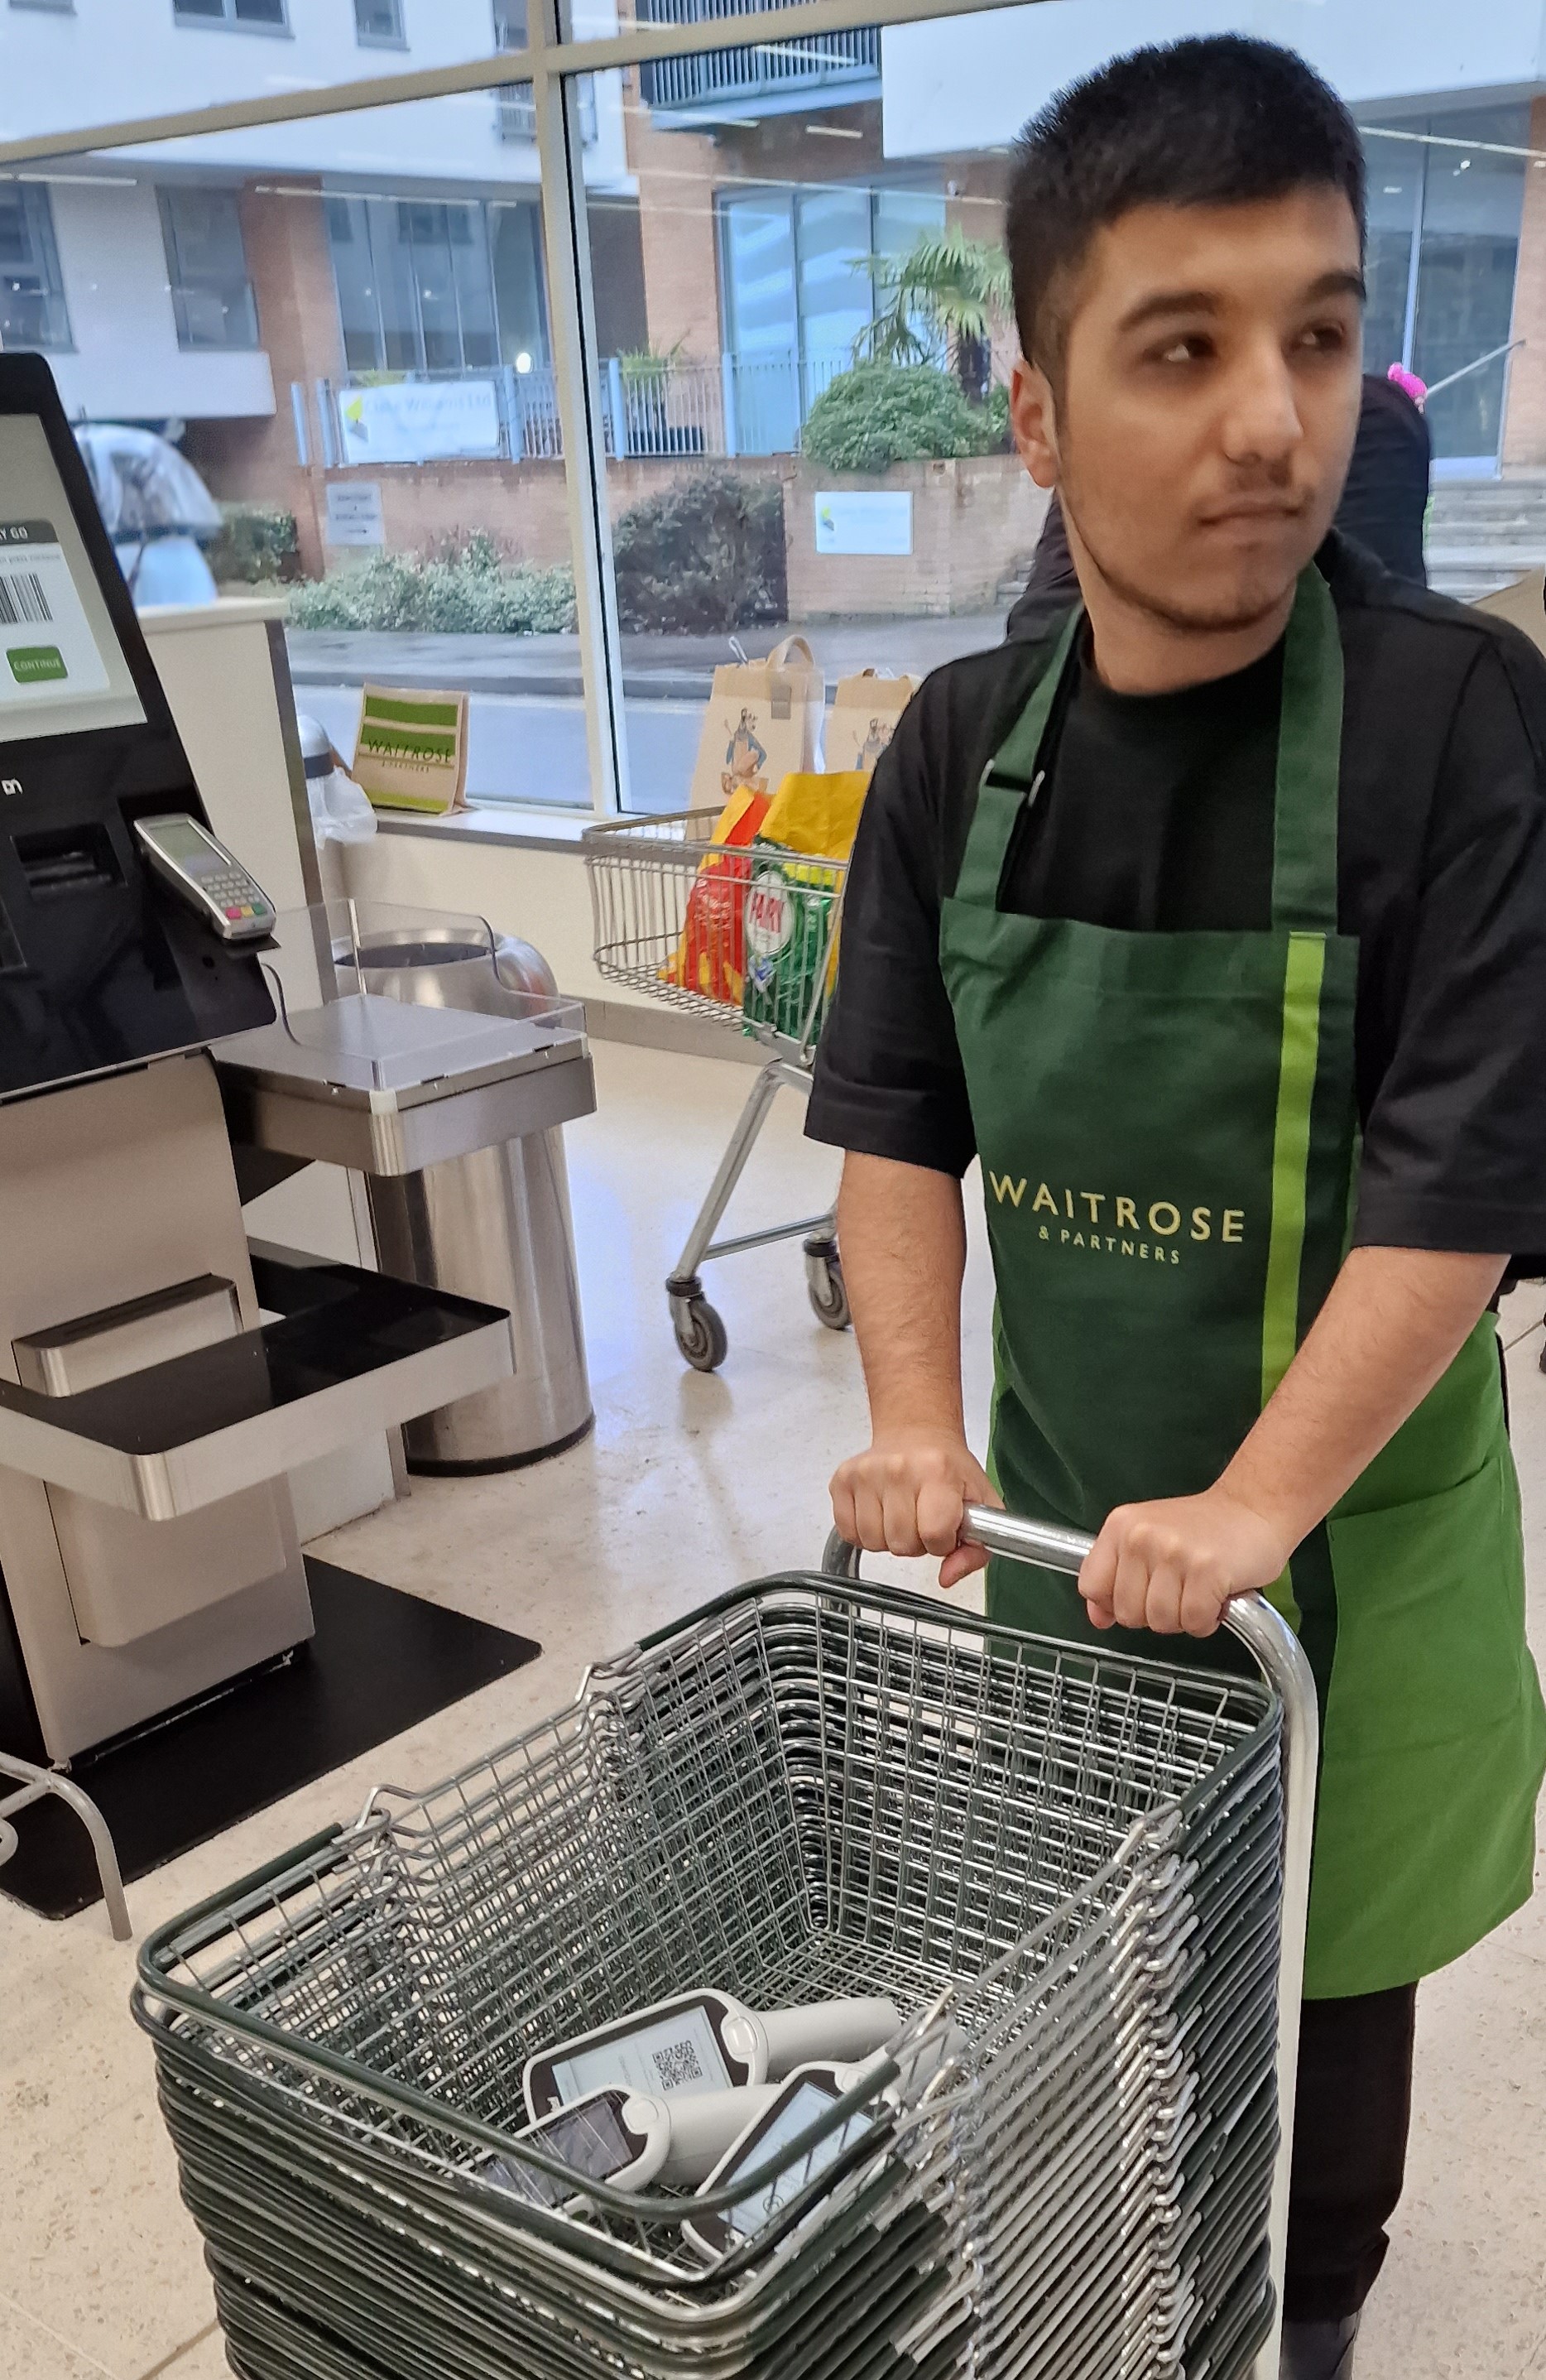 A student taking part in work experience at Waitrose